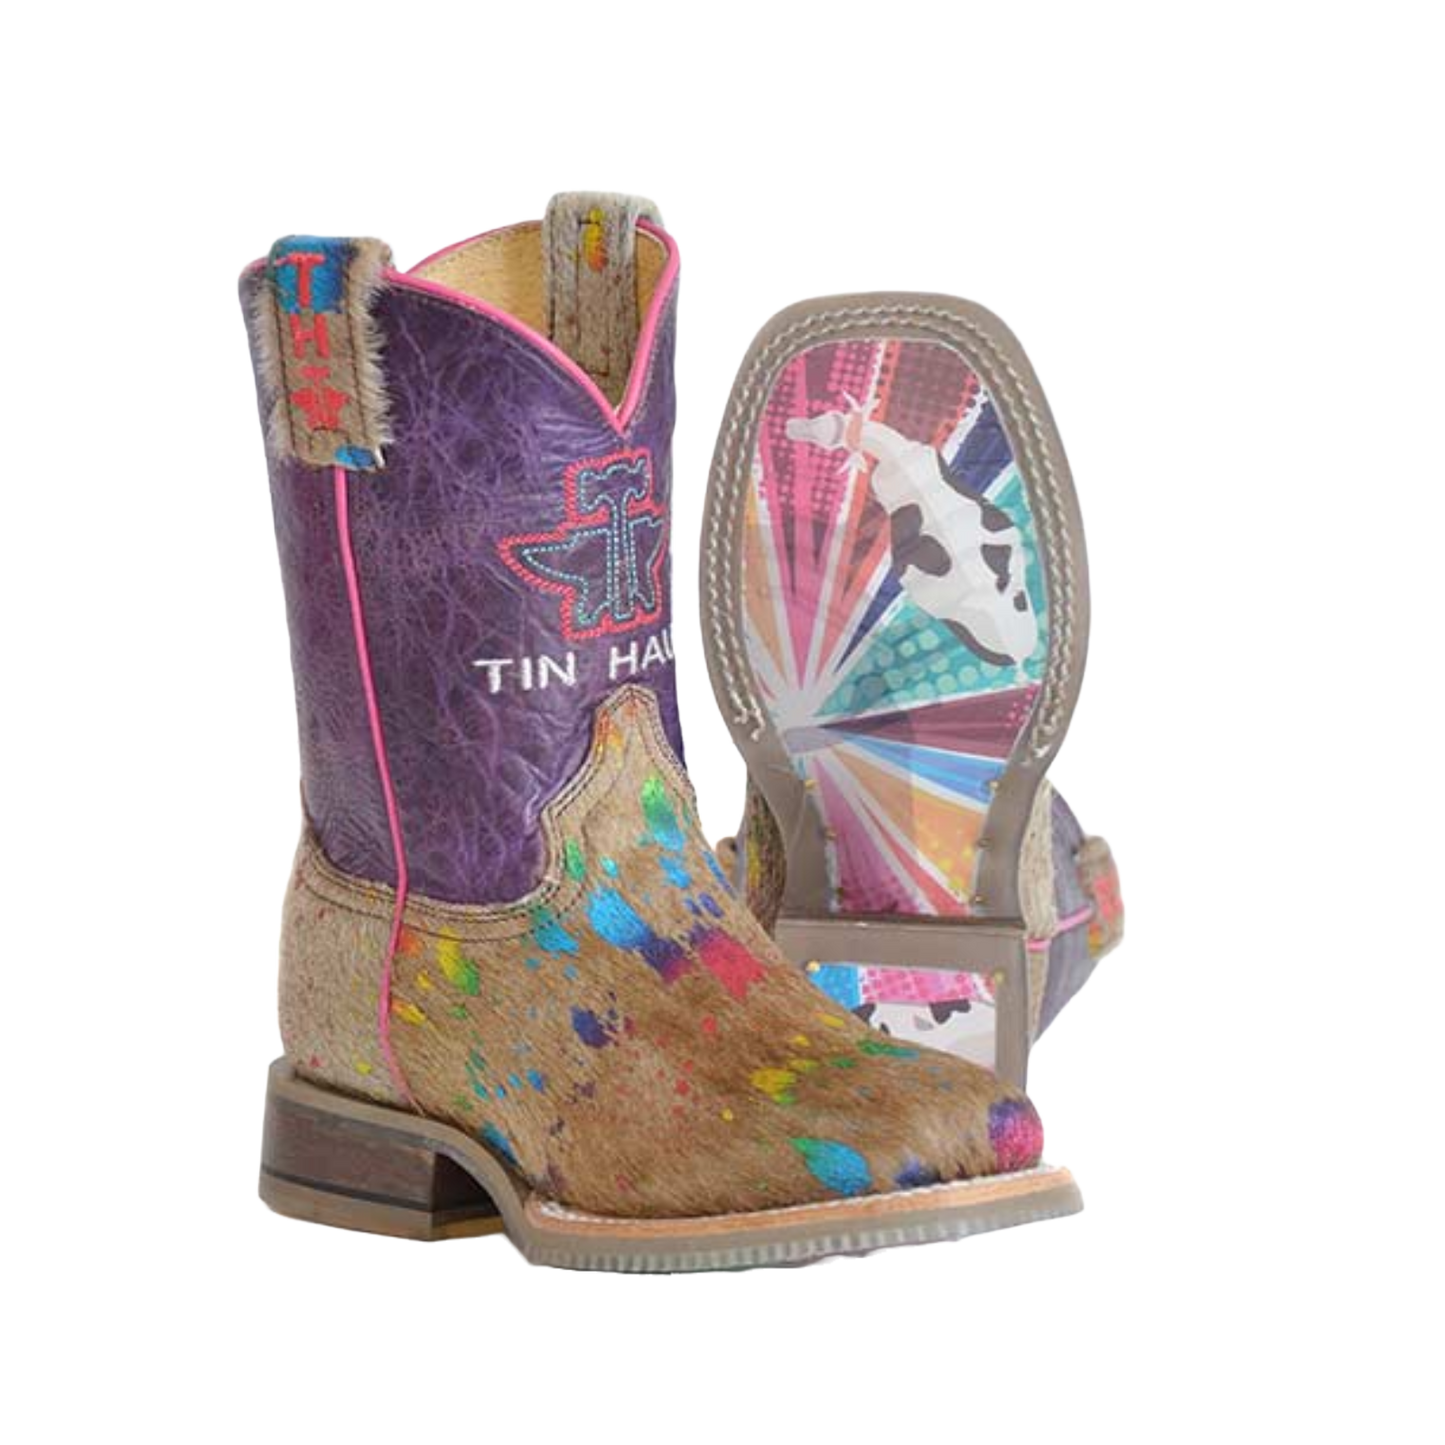 Roper Girl's Multicolored Hair On Square Toe Boots 14-119-0077-0873